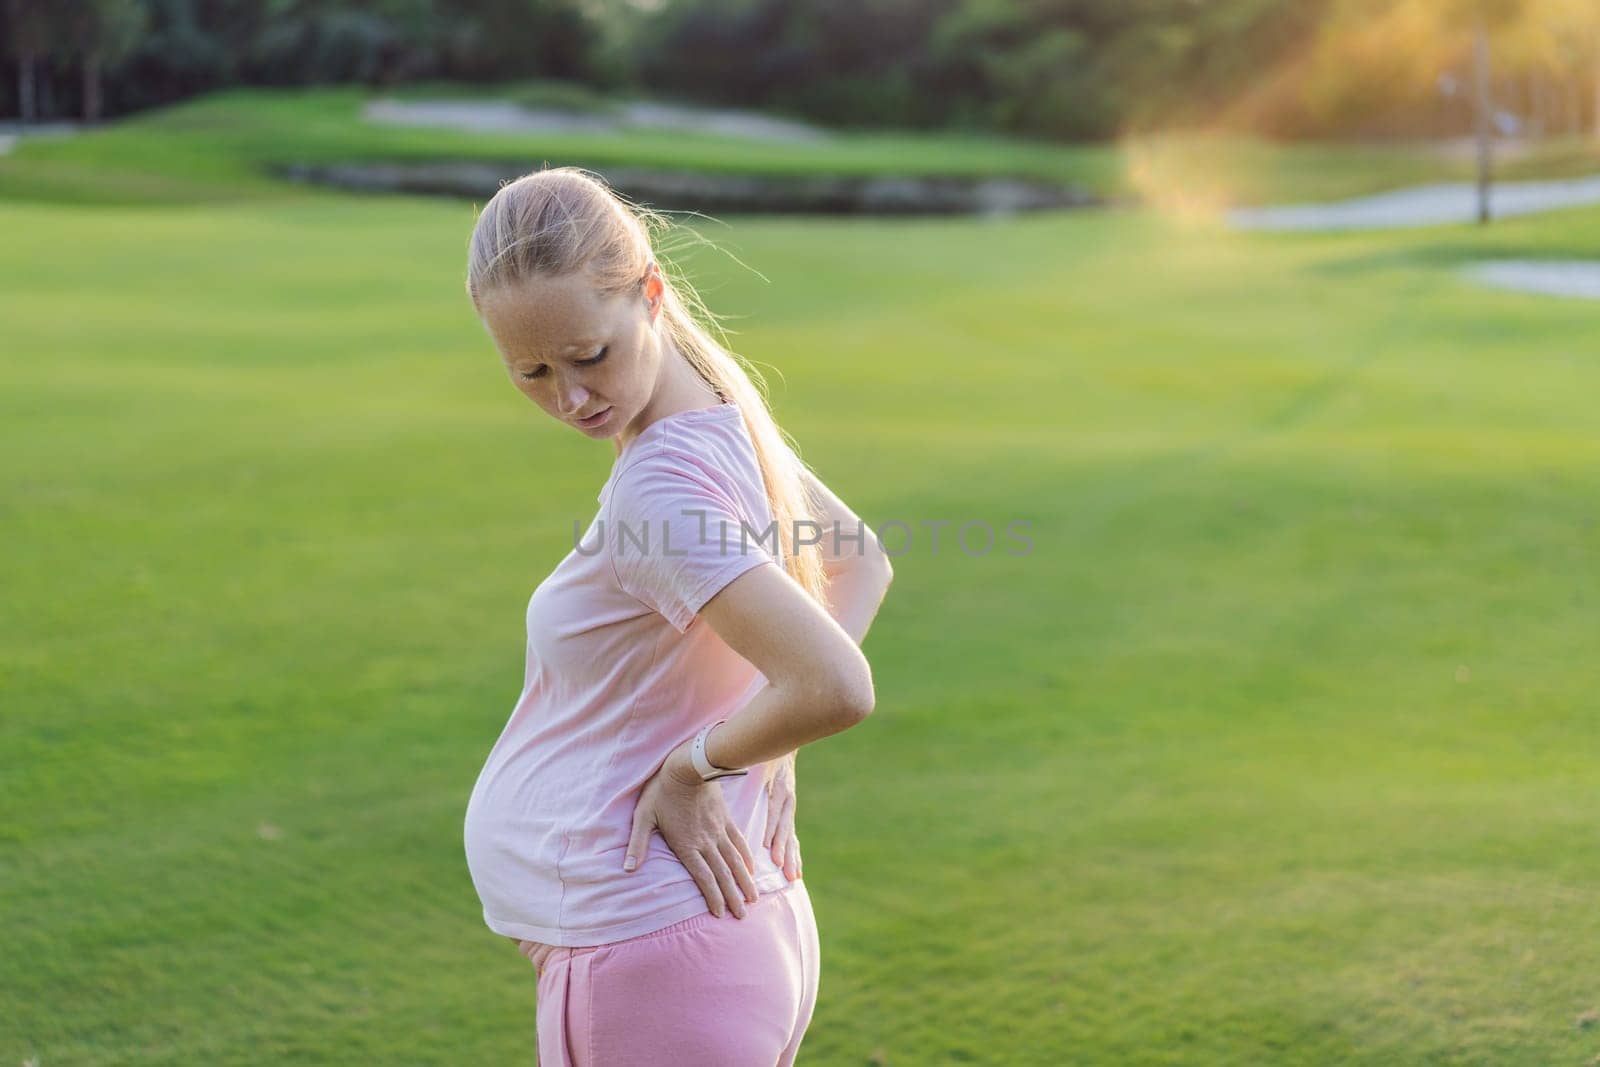 Expectant woman experiences back pain outdoors, seeking relief and comfort during pregnancy with a gentle outdoor stretch or rest by galitskaya